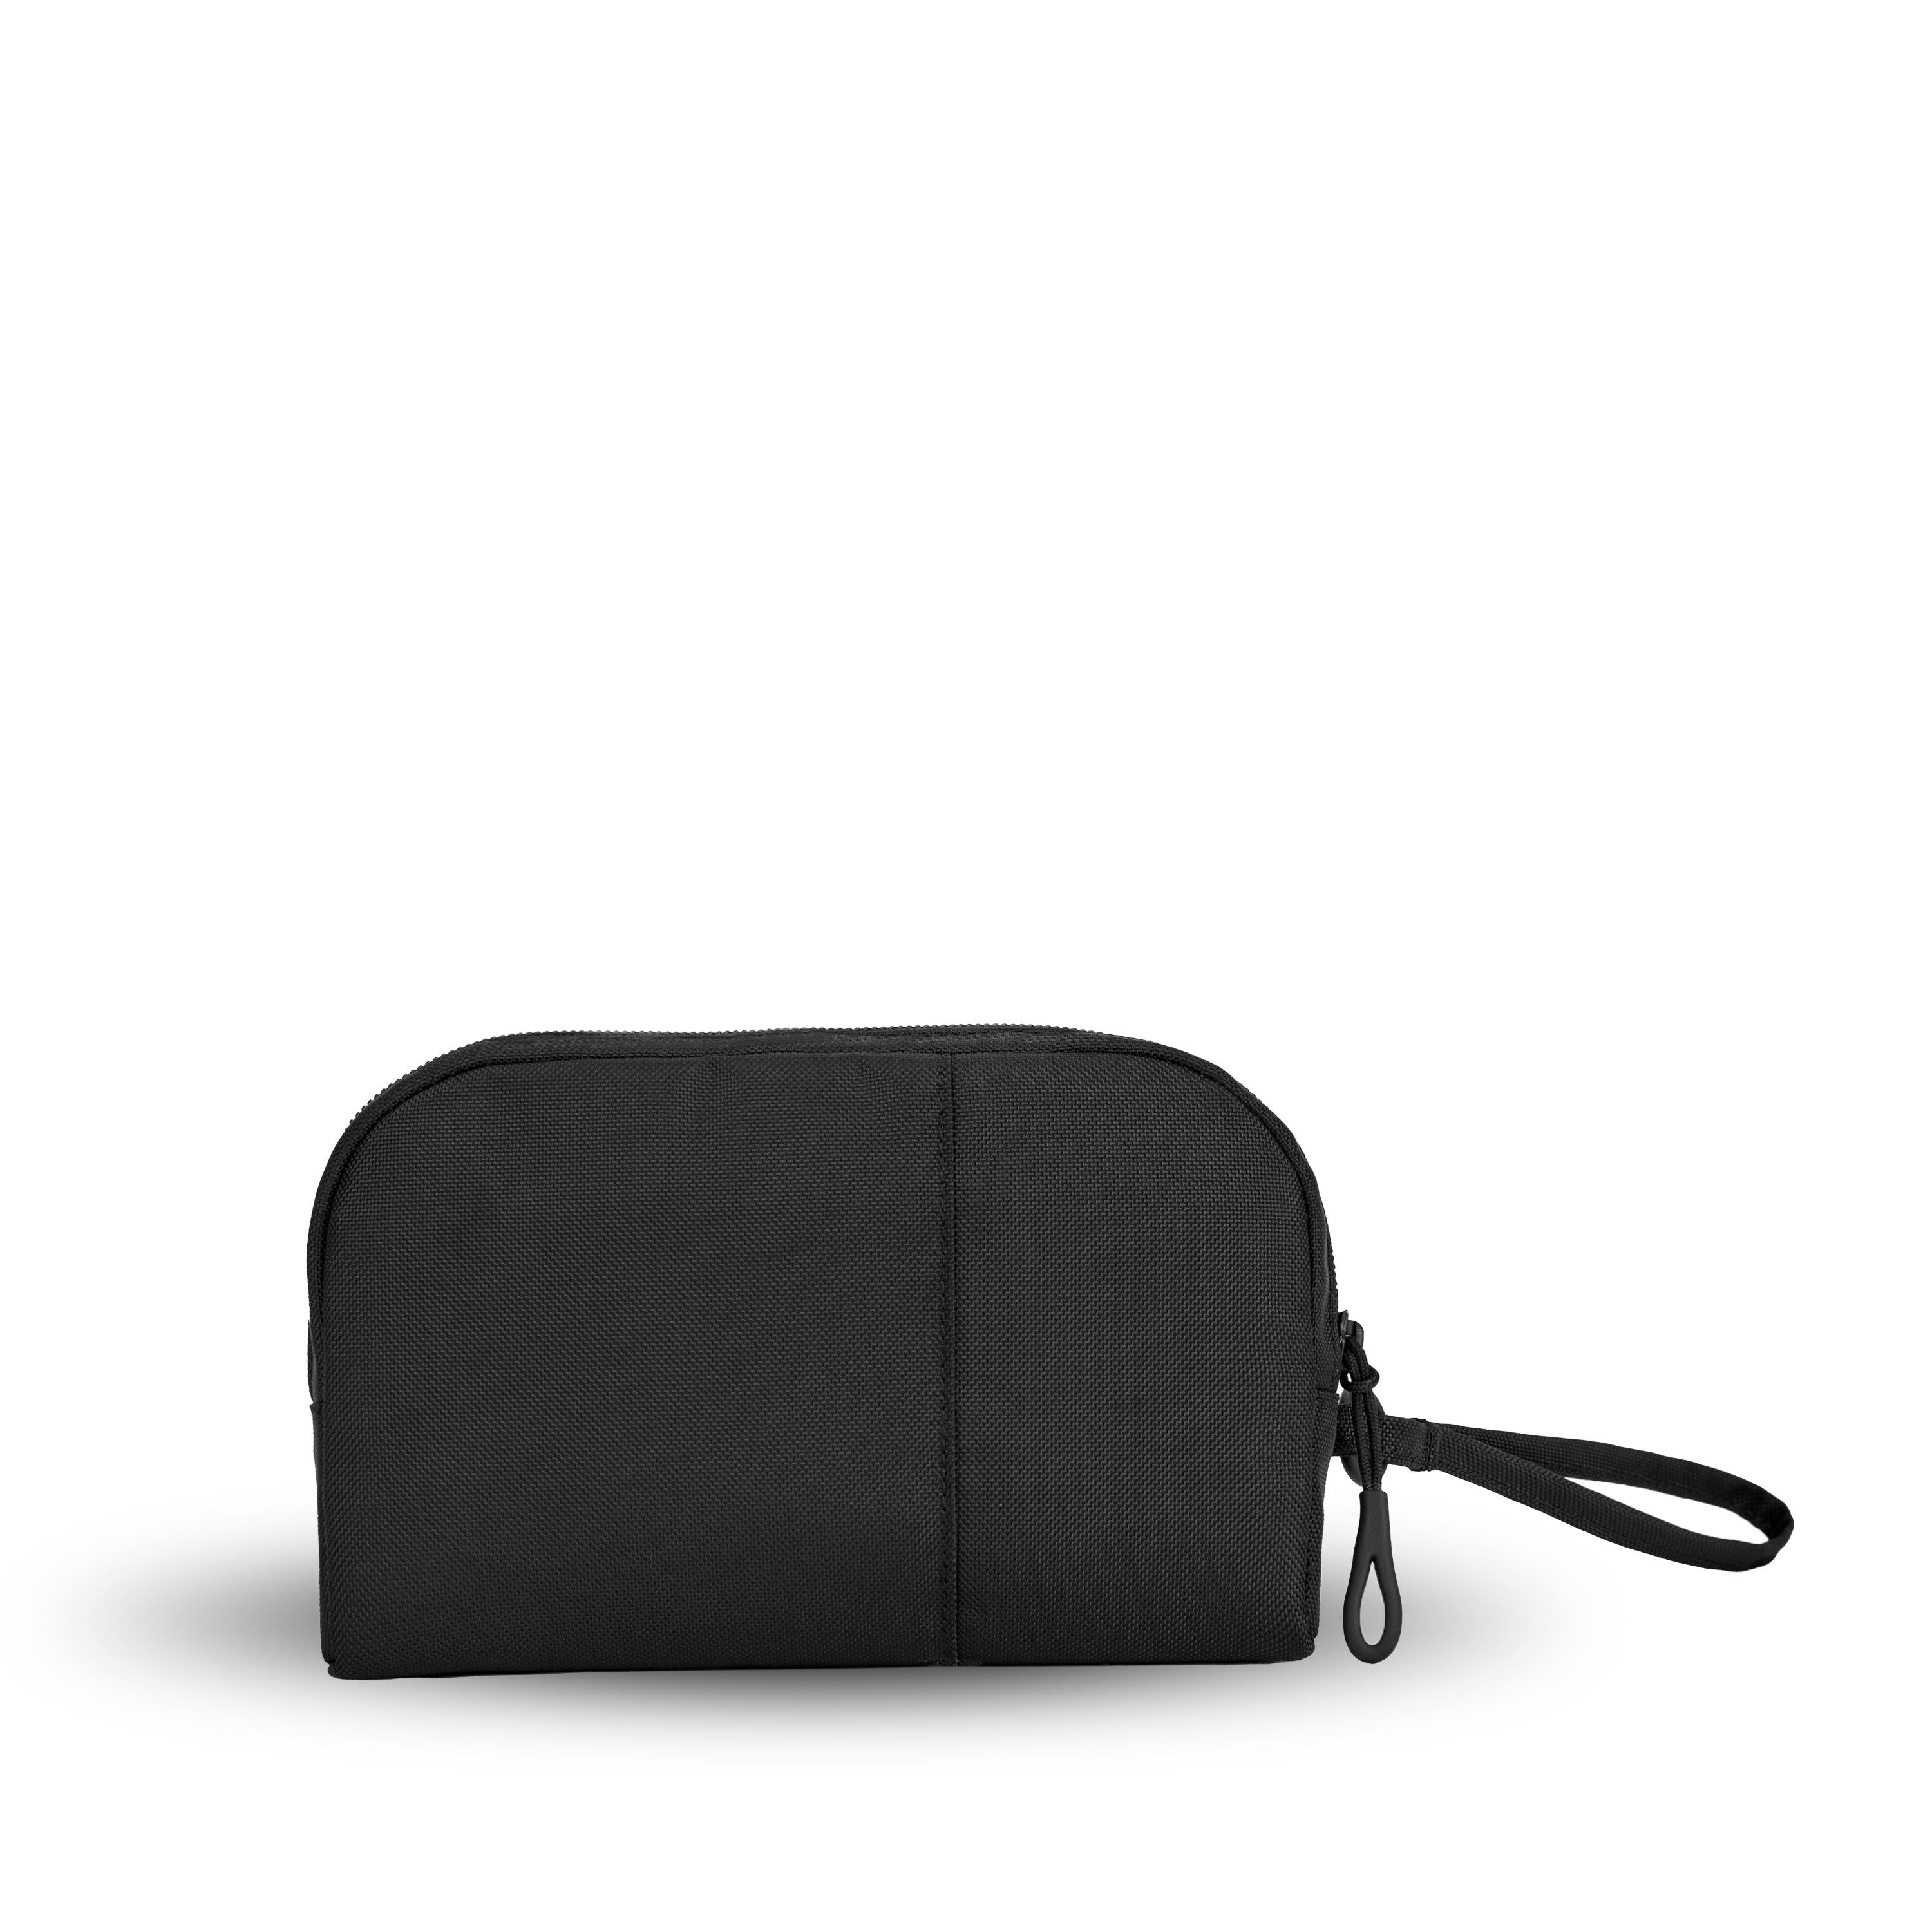 Back view of Sherpani travel accessory, the Jolie in Raven, in small size. The pouch is entirely black. It features a black wristlet strap and an easy-pull zipper accented in black. 